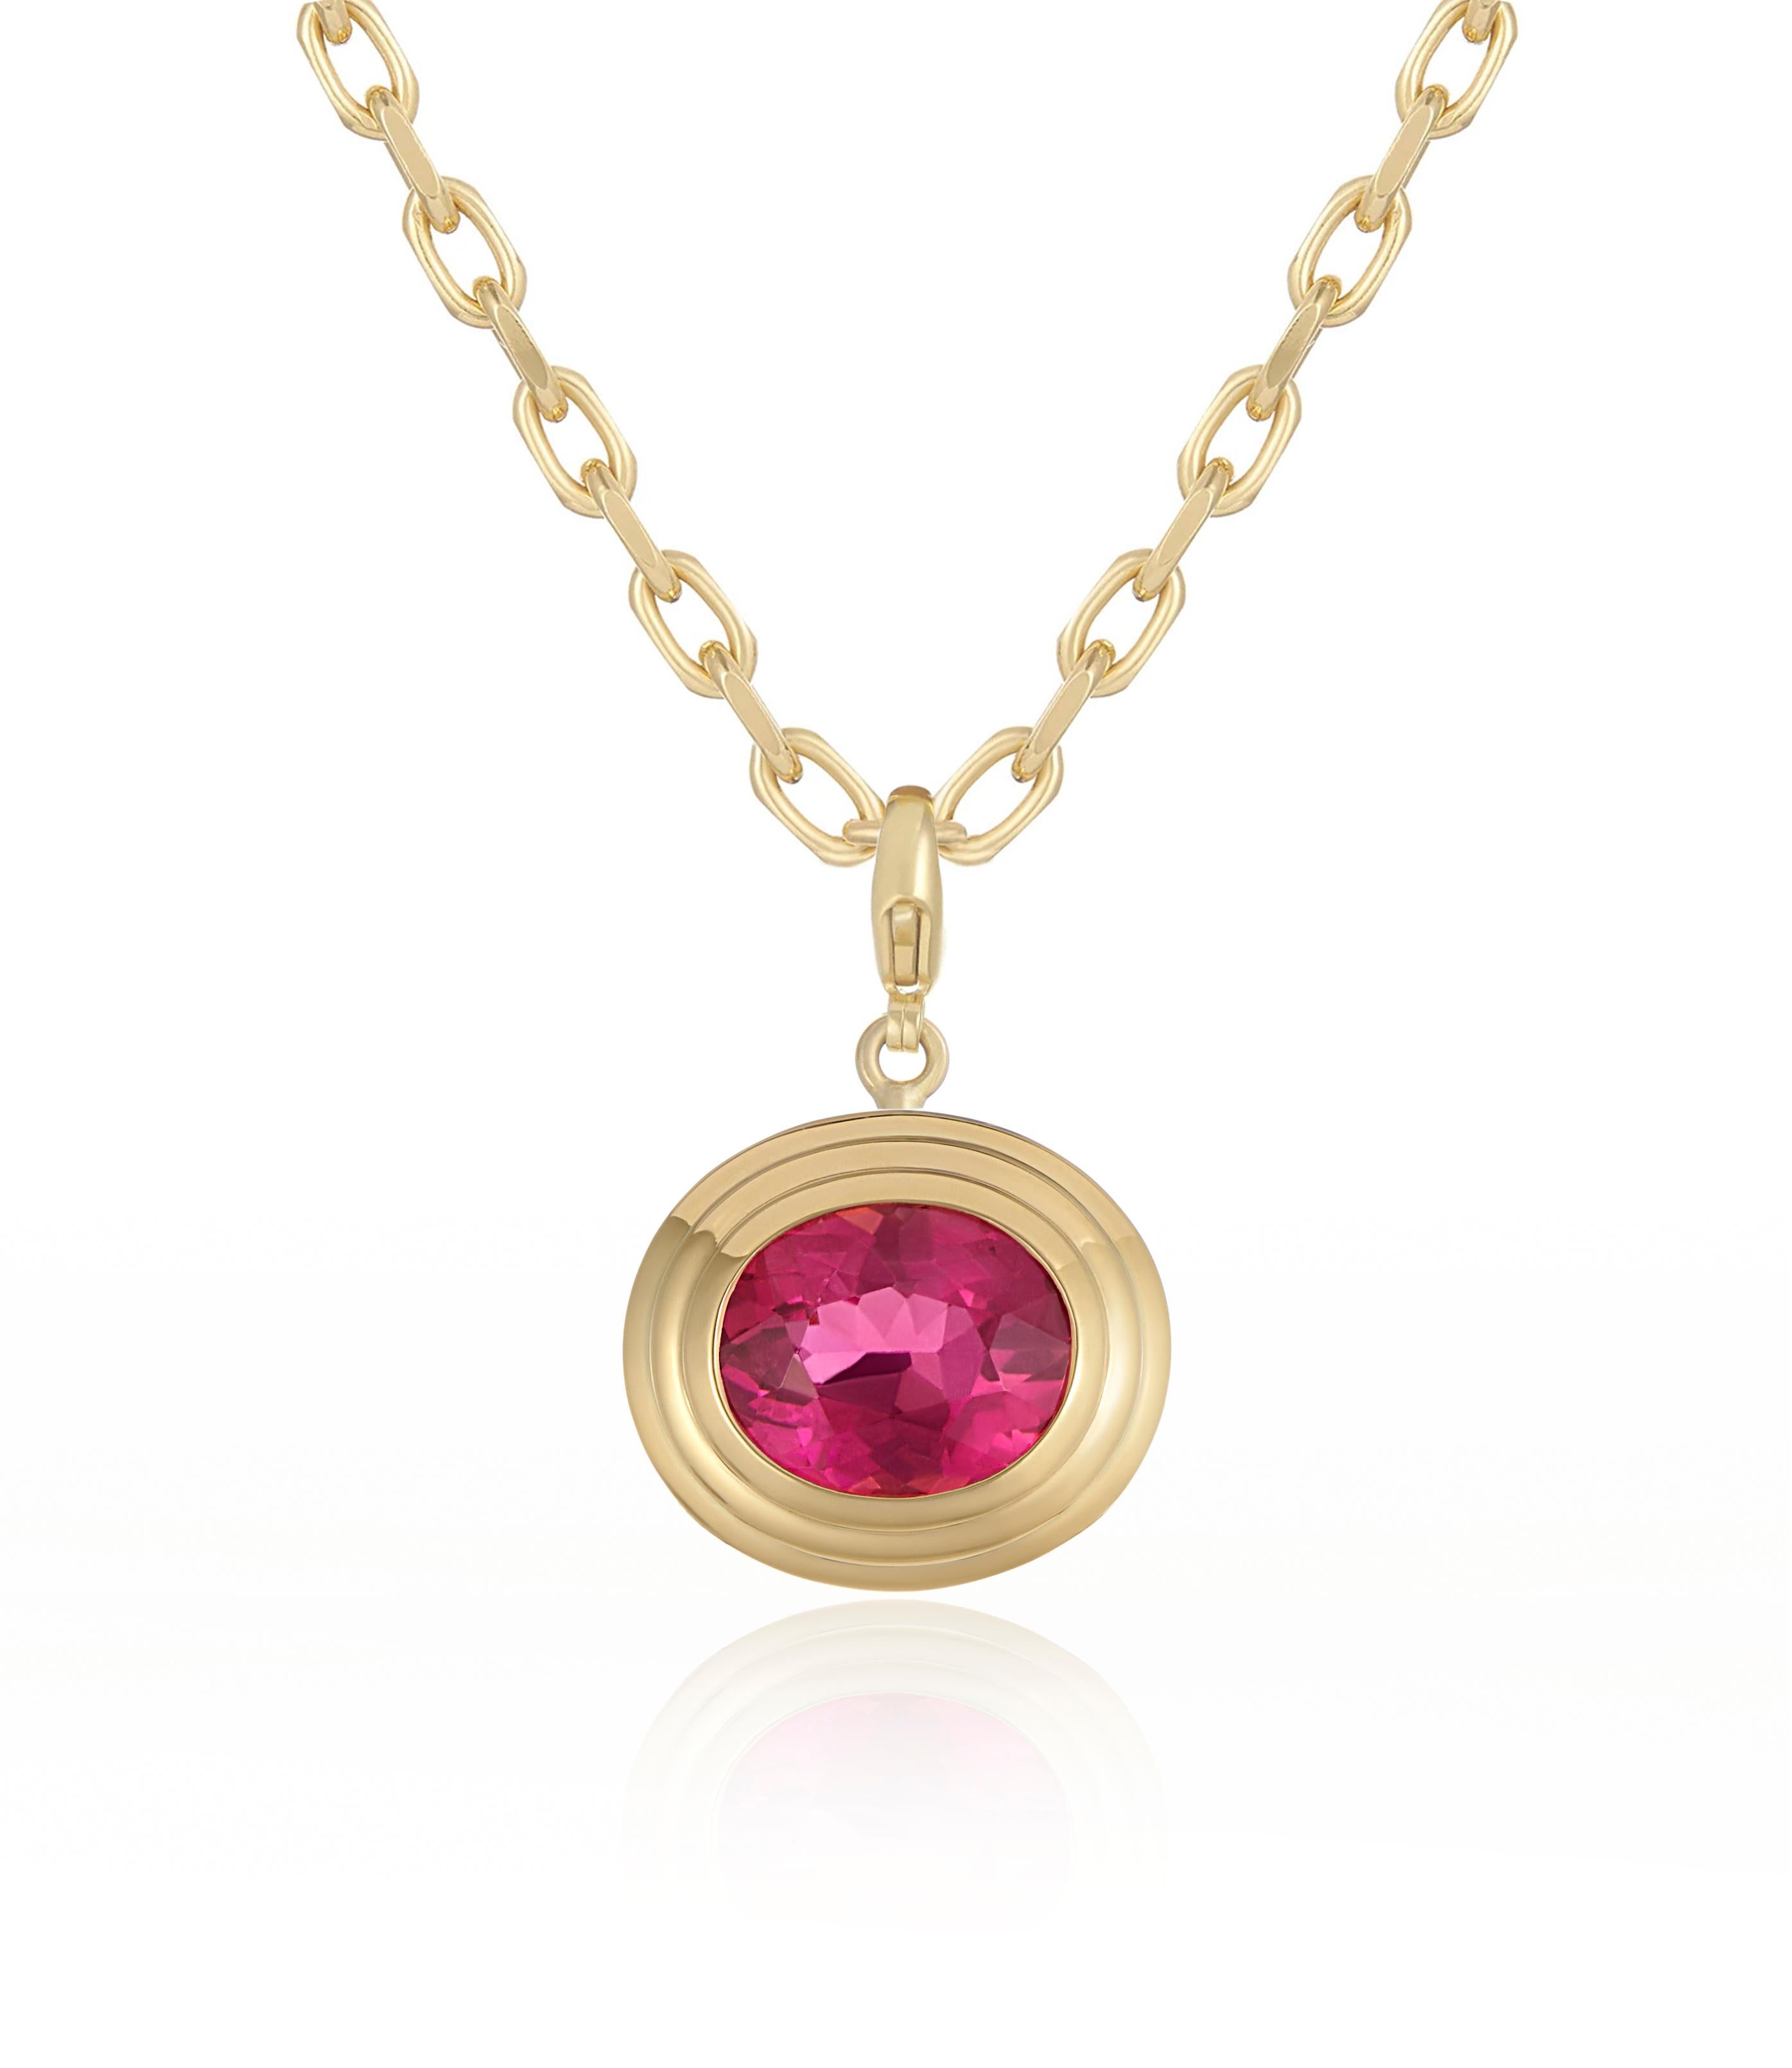 18k Yellow Gold
3.75ct Pink Tourmaline 

From the Athena collection, this bold and beautiful necklace takes its inspiration from the sweeping lines of classical Greek architecture.

It is handcrafted in 18k yellow gold and set with a one-of-a-kind